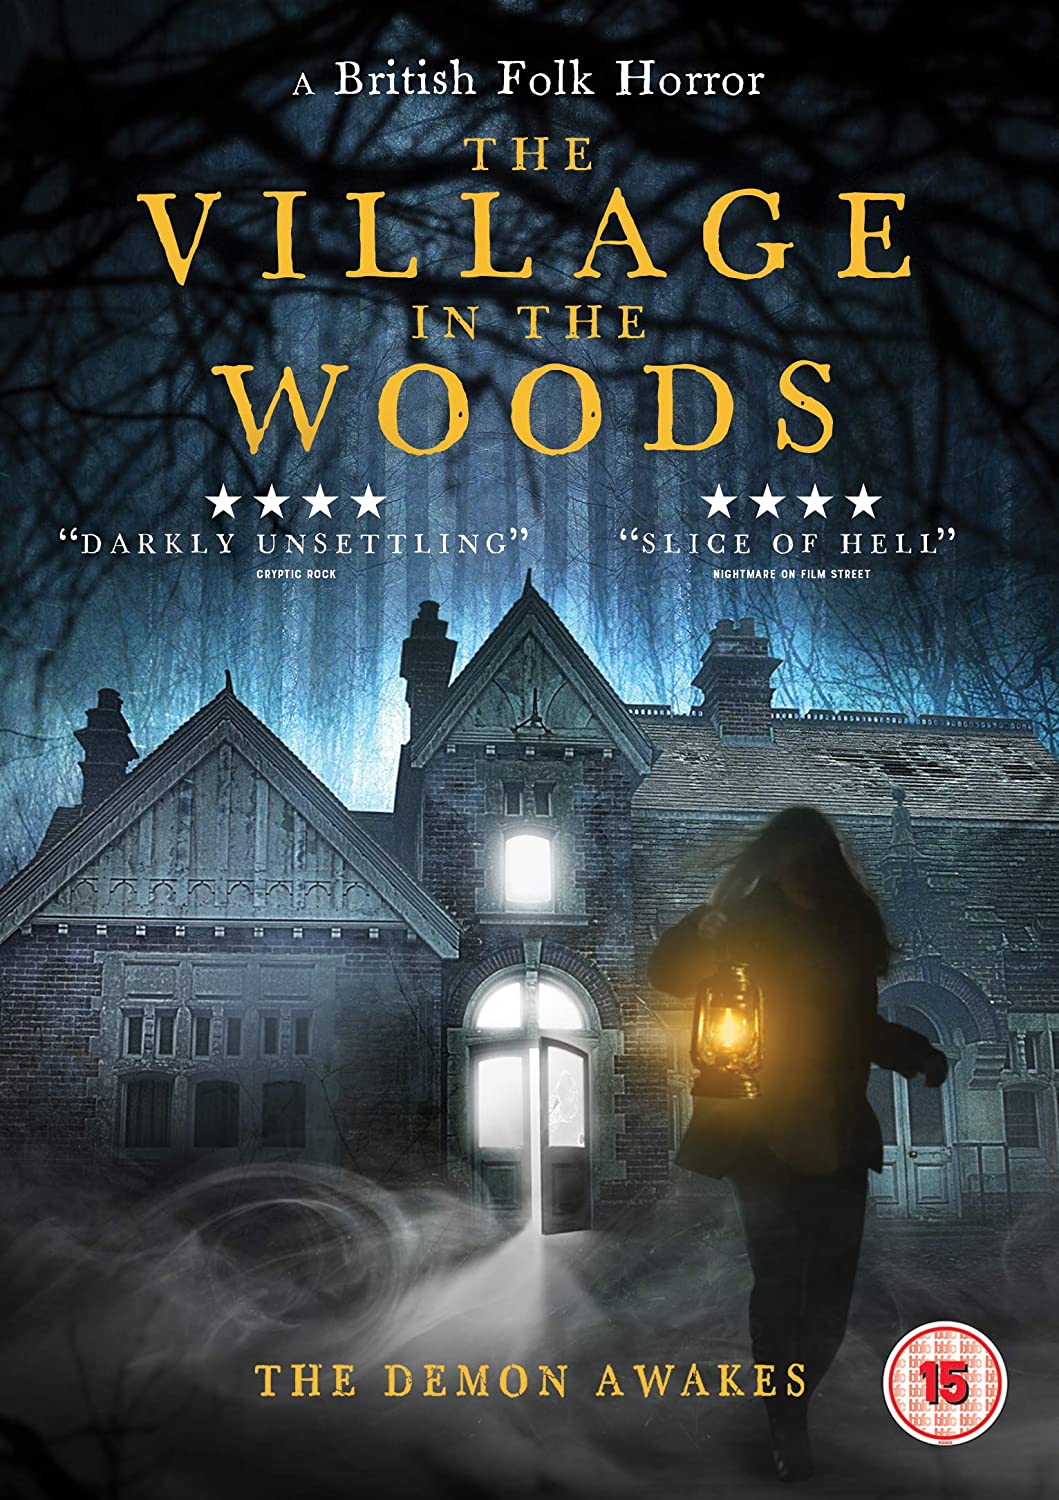 The Village in the Woods - Horror [DVD]